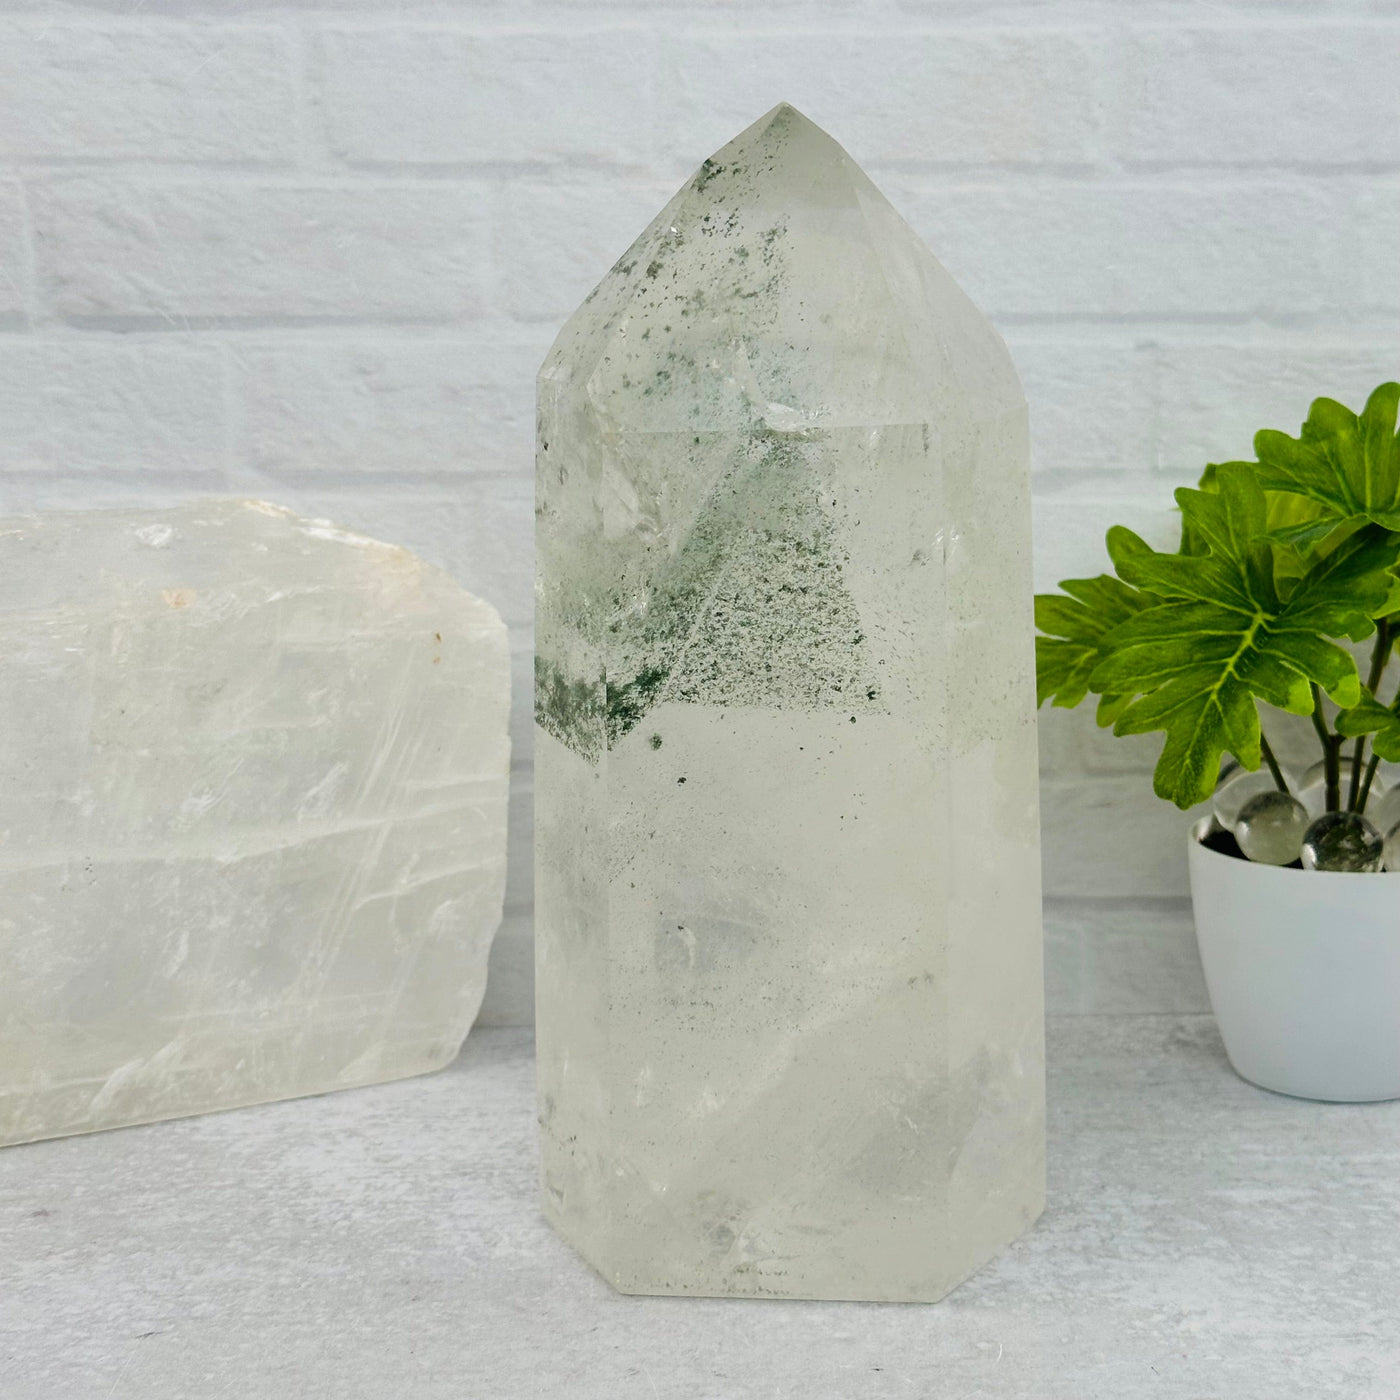 Large Crystal Quartz point with Green Chlorite Phantom displayed as home decor 